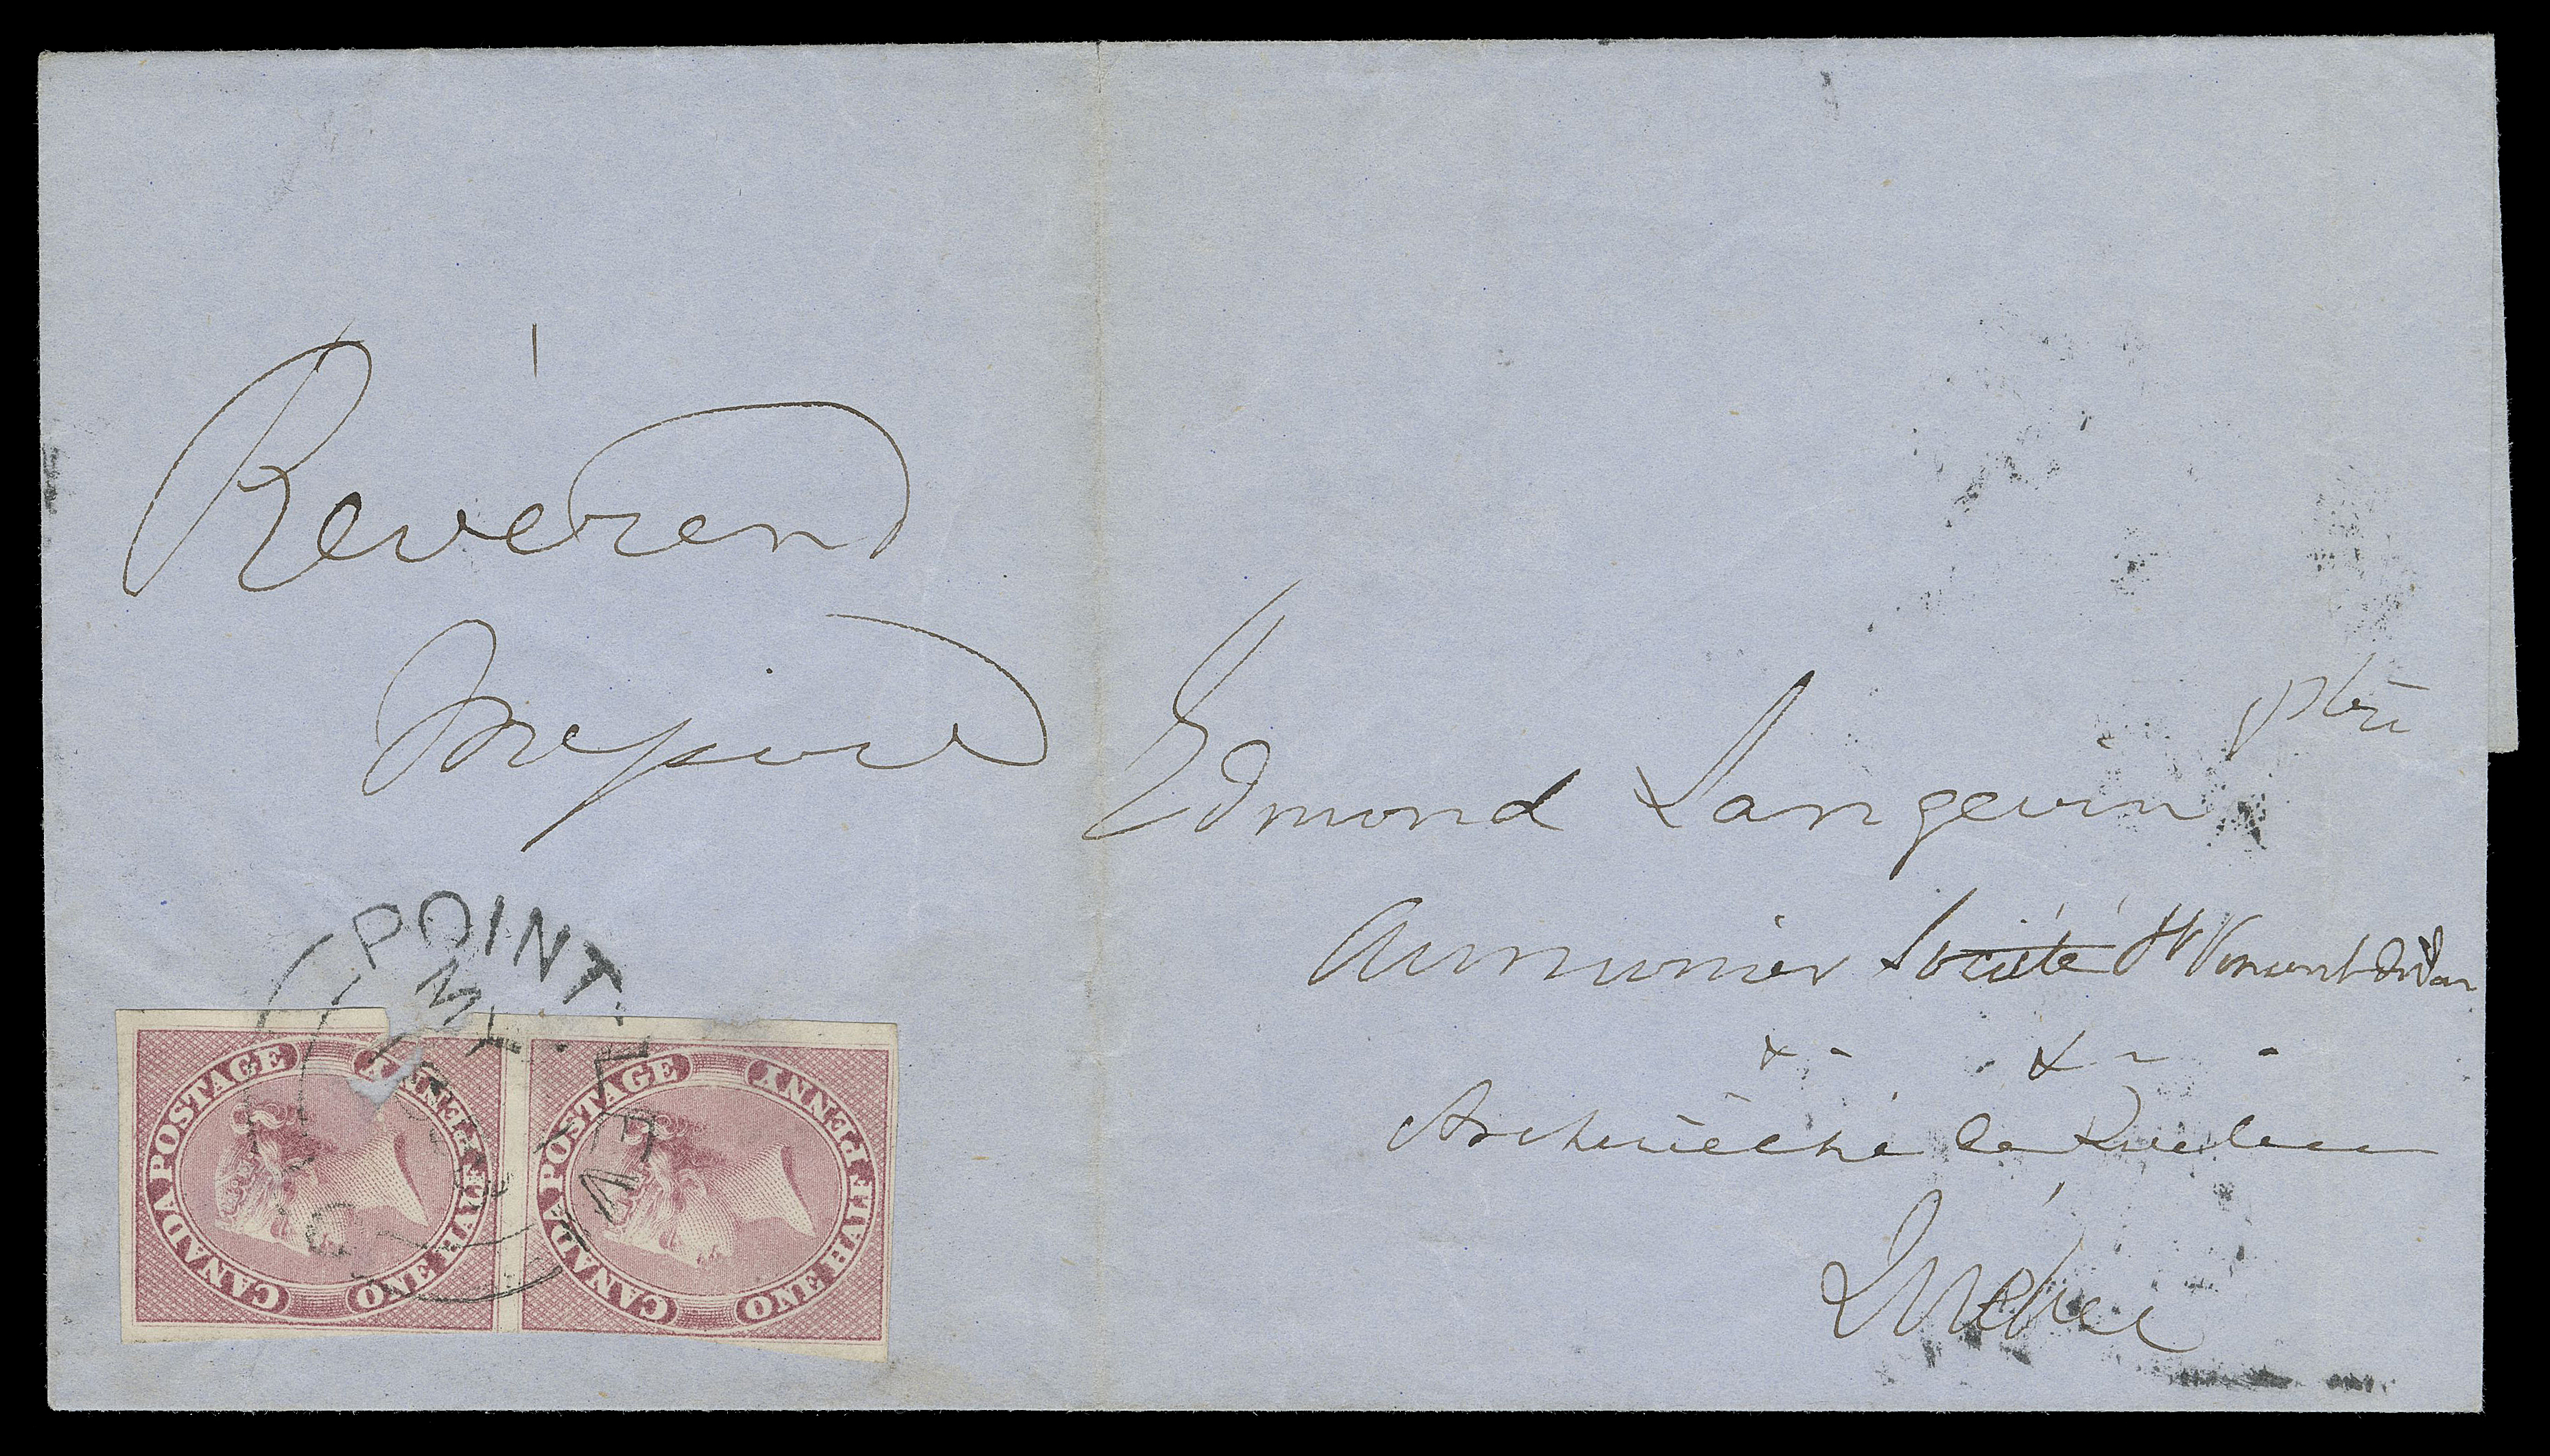 HALF PENNY AND ONE CENT  1858 (May 1) Blue folded cover from Point Lévi, L.C. to Québec  franked with a vertical imperforate pair of half penny rose on  medium wove paper, top stamp faulty before being affixed, ideally tied by clear Point-Levi double arc dispatch, superbly struck on back with same-day Quebec receiver. Pays the very rare adjacent  post office rate commonly known as "ferriage across the St.  Lawrence River" one-penny rate - one of only a mere five such  franked covers have been reported; a great cover for a serious  postal history collection, Fine (Unitrade 8)

Provenance: The "Loch" Collection - Canadian Pence Issue, Firby  Auctions, April 1999; Lot 164

Literature: Illustrated and discussed in article "The Quebec -  Point Levi 1d / 2¢ cover" by George Arfken & Charles Firby, BNA  Topics, Whole 514, Vol. 65, No. 1, January - March 2008, pages  20-24 (Figure 3).

Census: This is Cover No. 3 listed in Table 22 "Adjacent Post  Office Rate Pence Covers" in Arfken, Leggett, Firby & Steinhart  "Canada